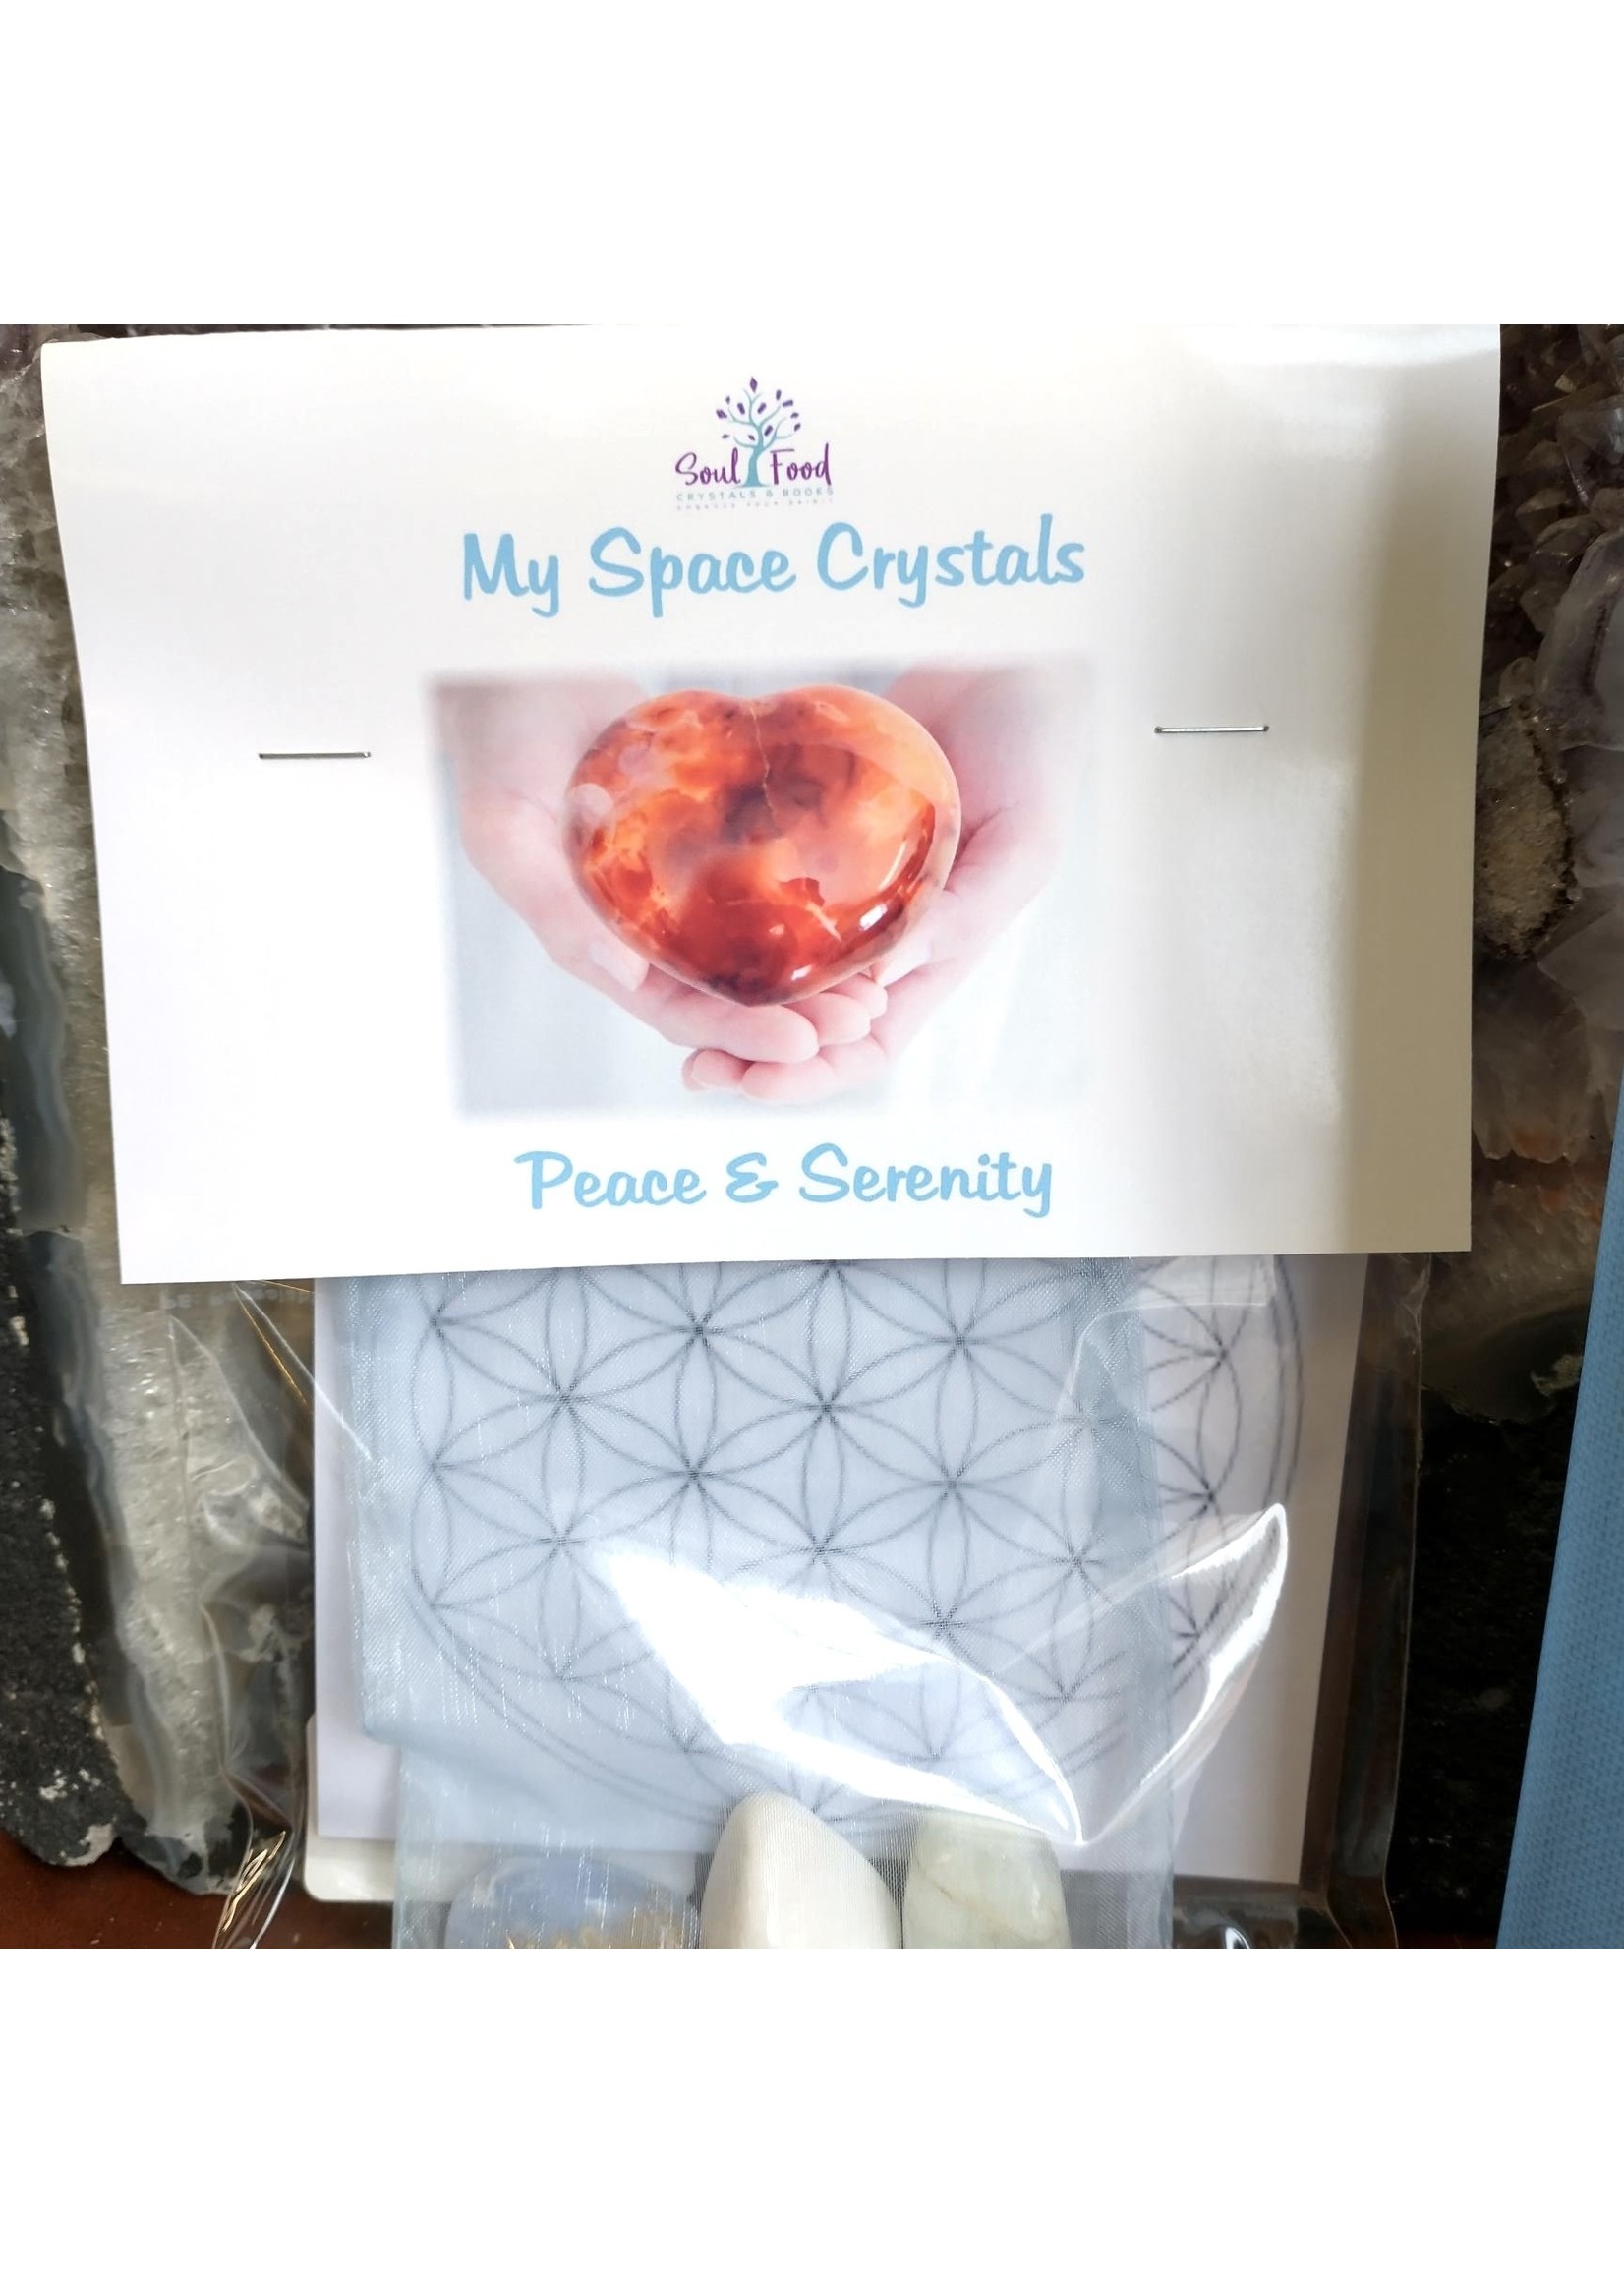 My Space Crystal Kits - Peace & Serenity